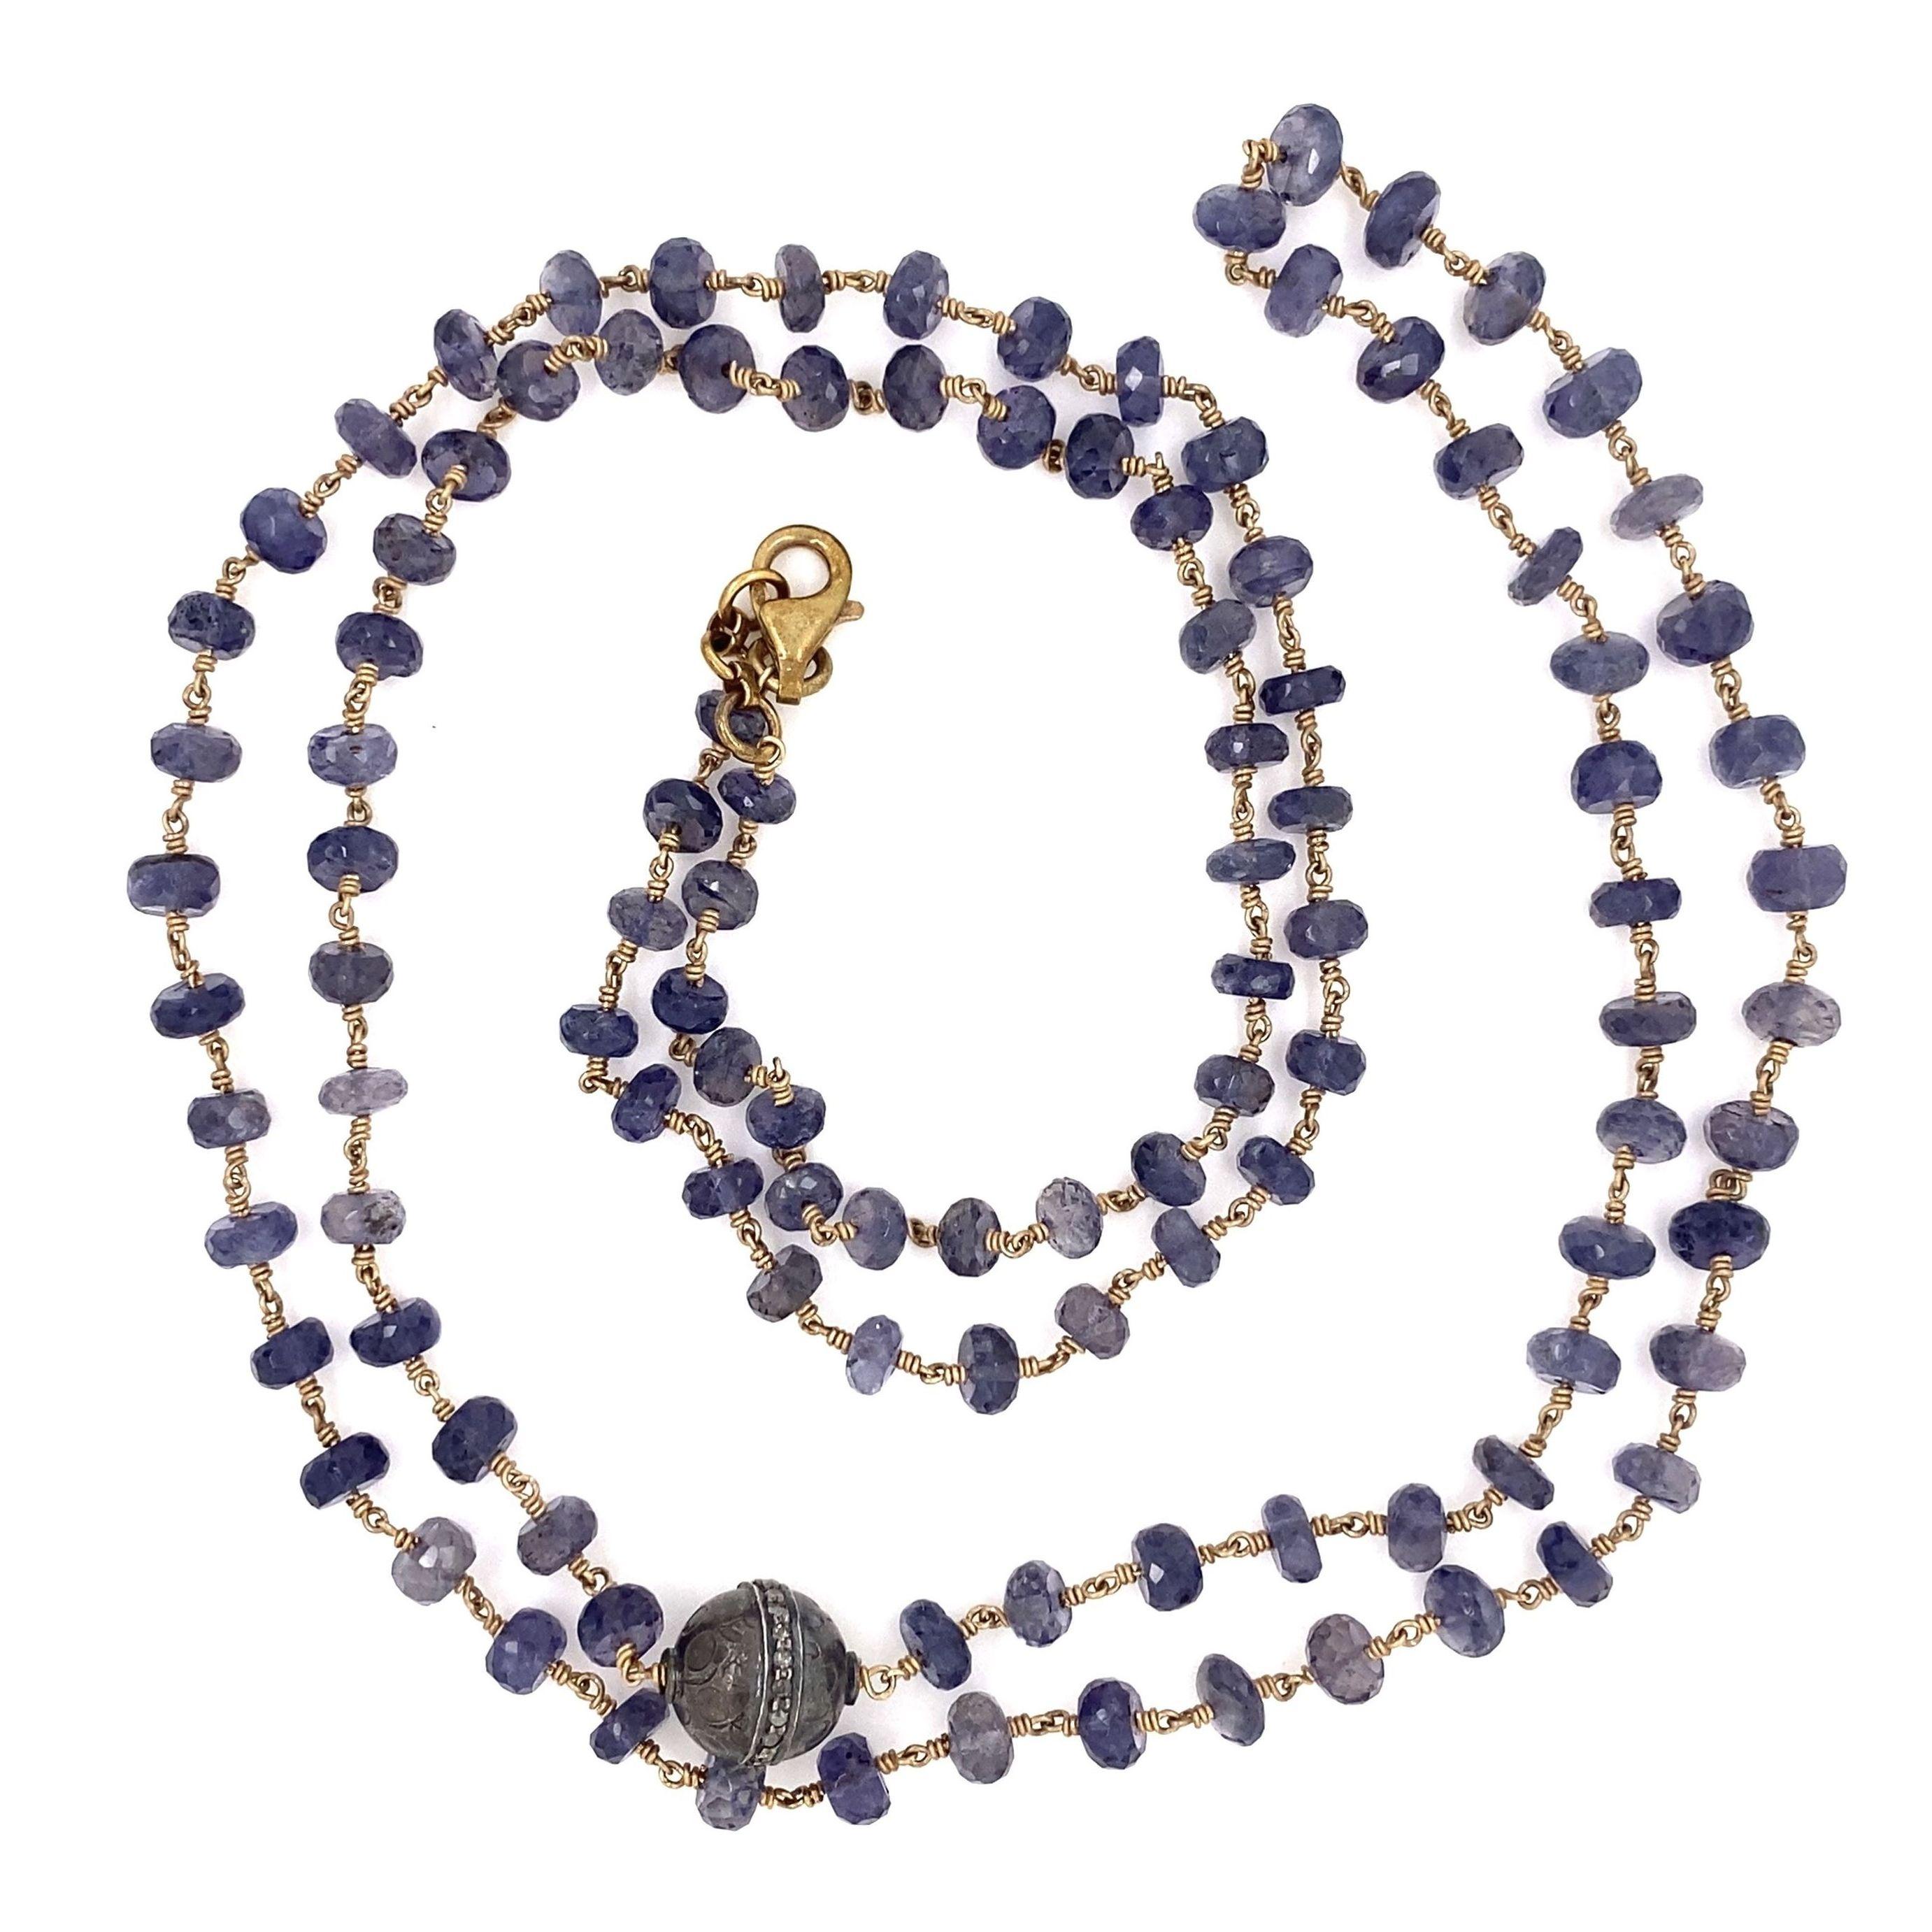 Beautiful Iolite Bead and Diamond Sterling Silver Long Chain Necklace. Featuring Iolite Beads, approx. 115.15tcw and Diamonds, approx. 0.27tcw. Necklace measures approx. 40” l x 0.25” w. Chic and Stylish...The perfect accessory for the modern woman!